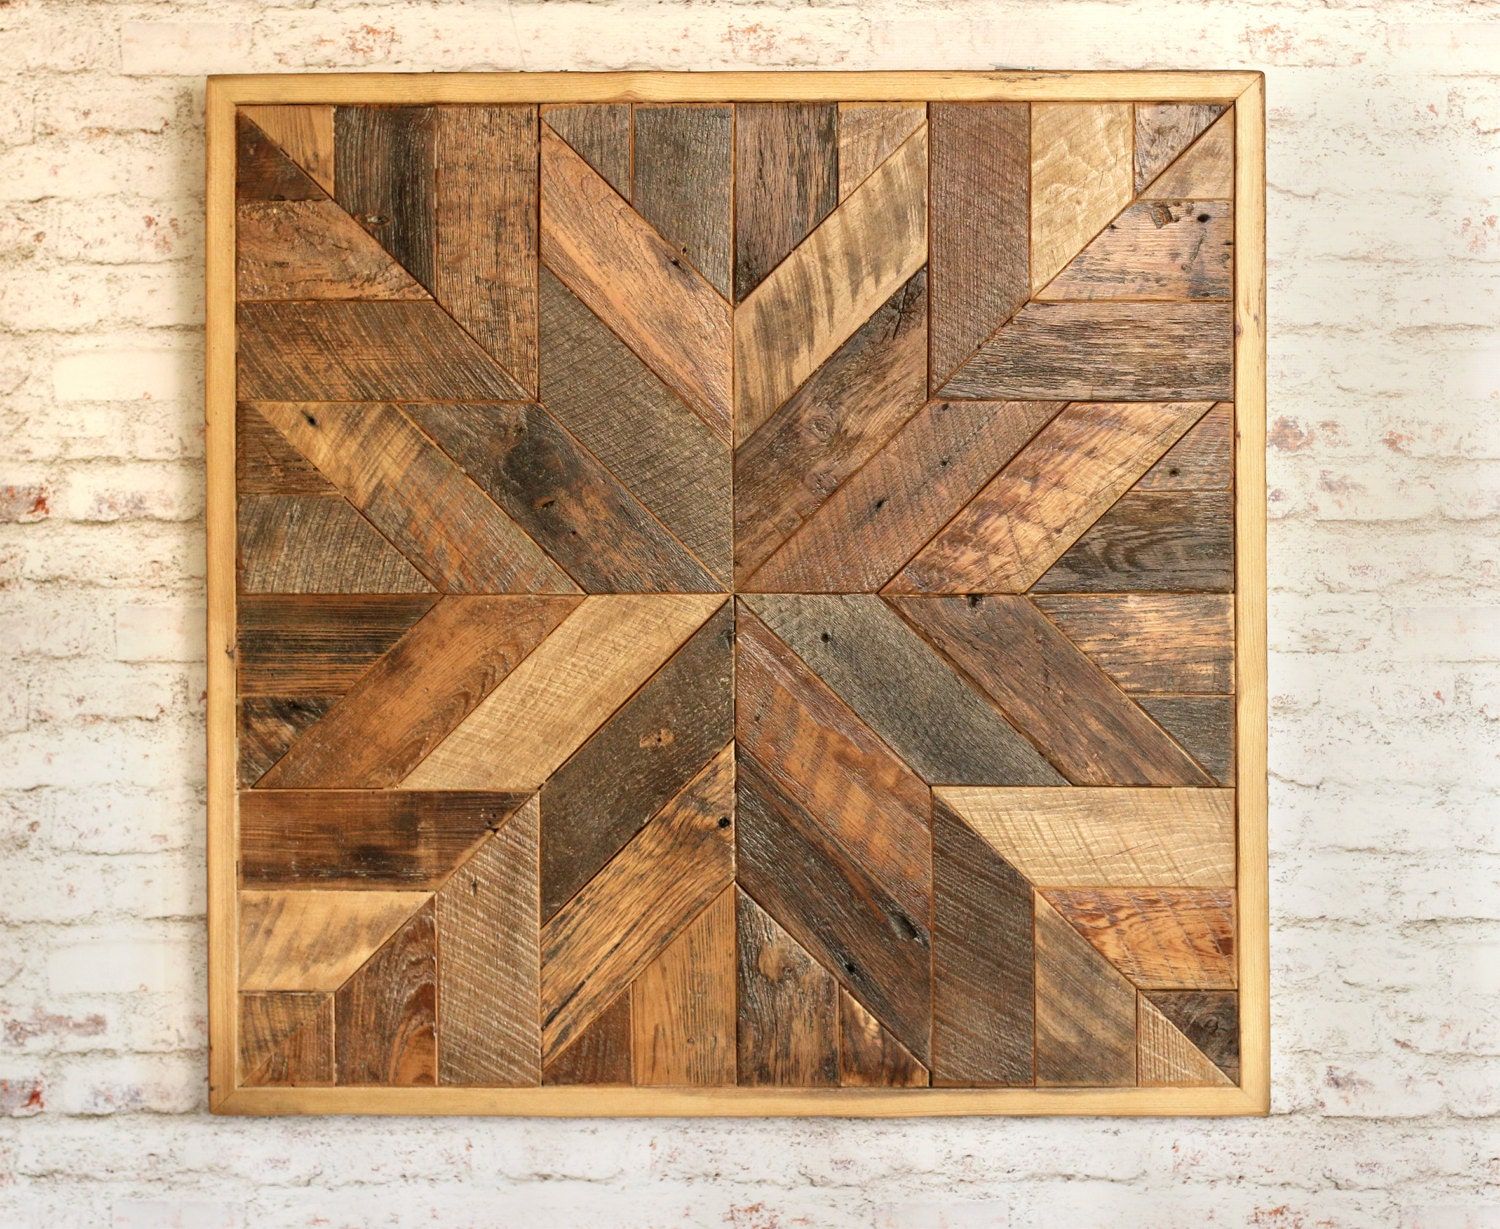 Reclaimed Wood Quilt Square 36 Inch Geometric Wall Art For Metallic Rugged Wooden Wall Art (View 5 of 15)